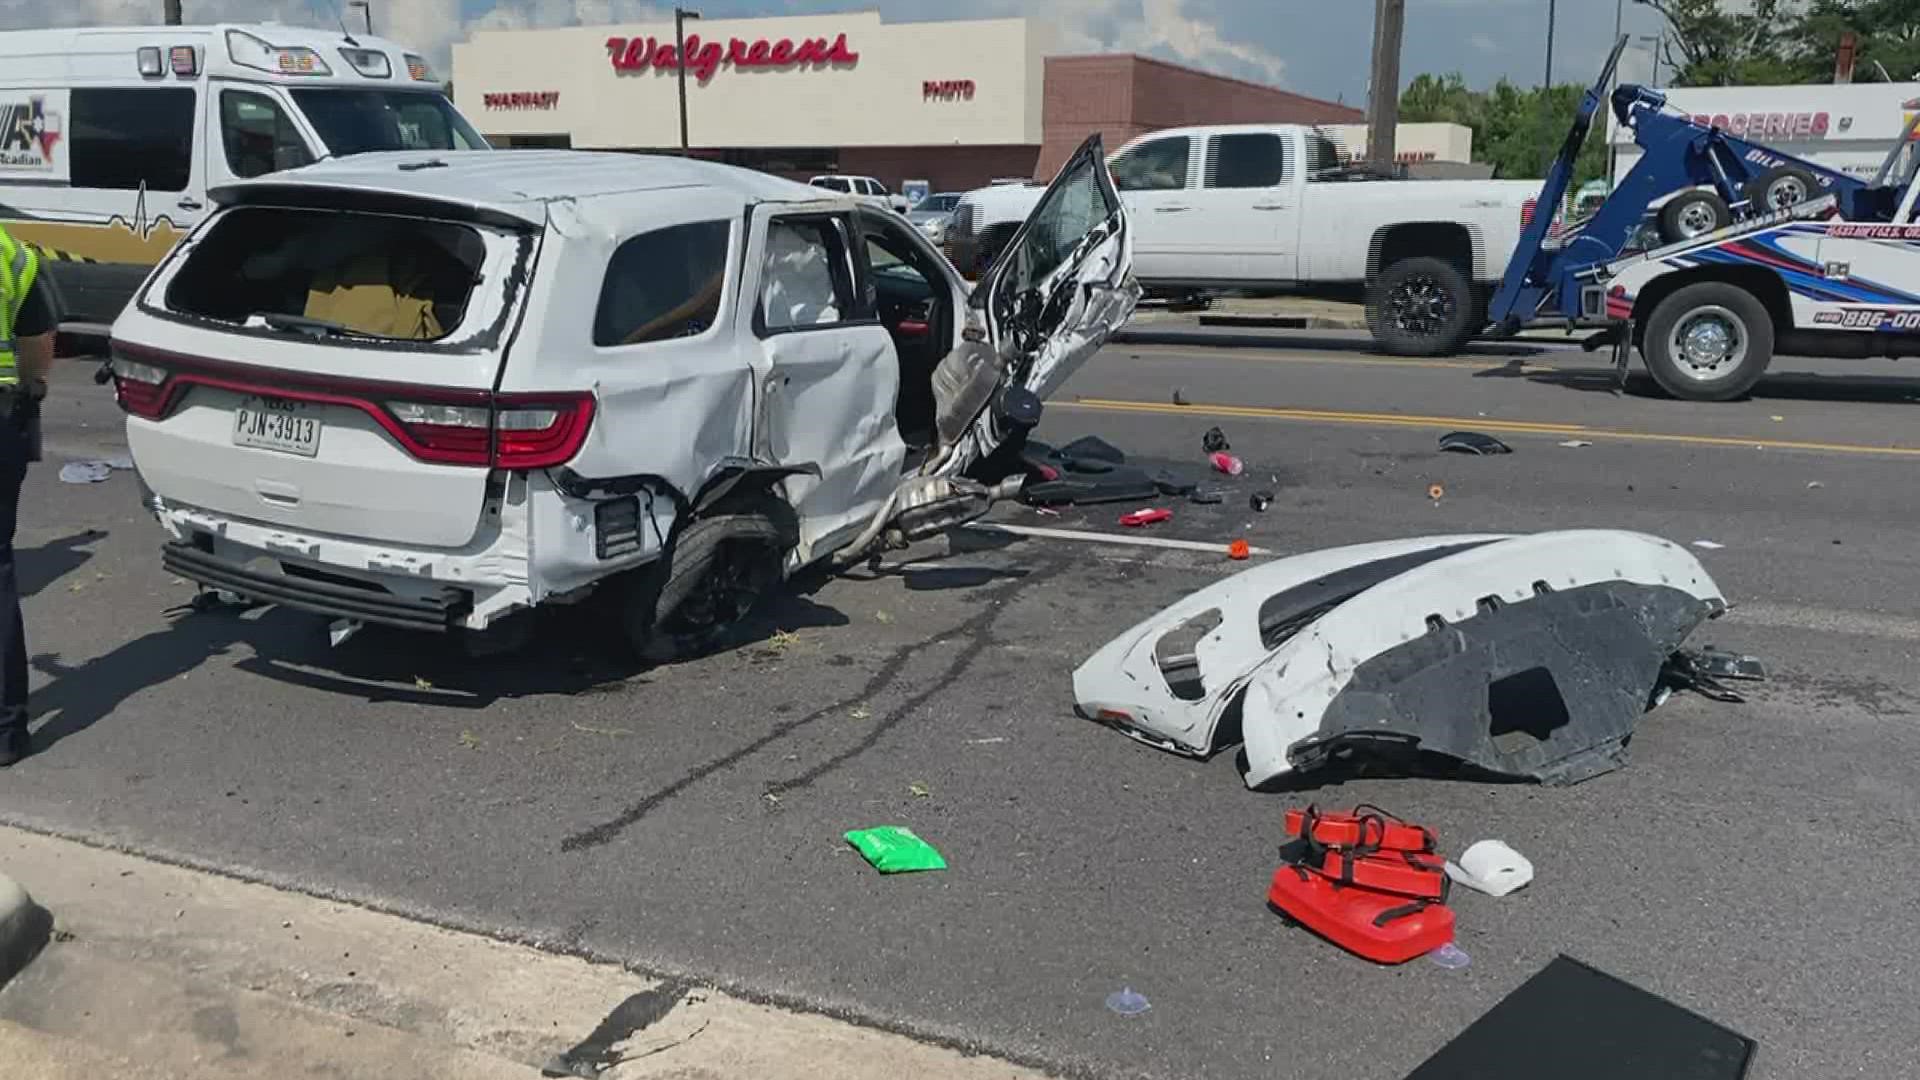 A witness told 12News crew on scene that a Chevrolet Impala pulled out of a turning lane and hit a Dodge Durango. The Durango flipped as a result of the collision.